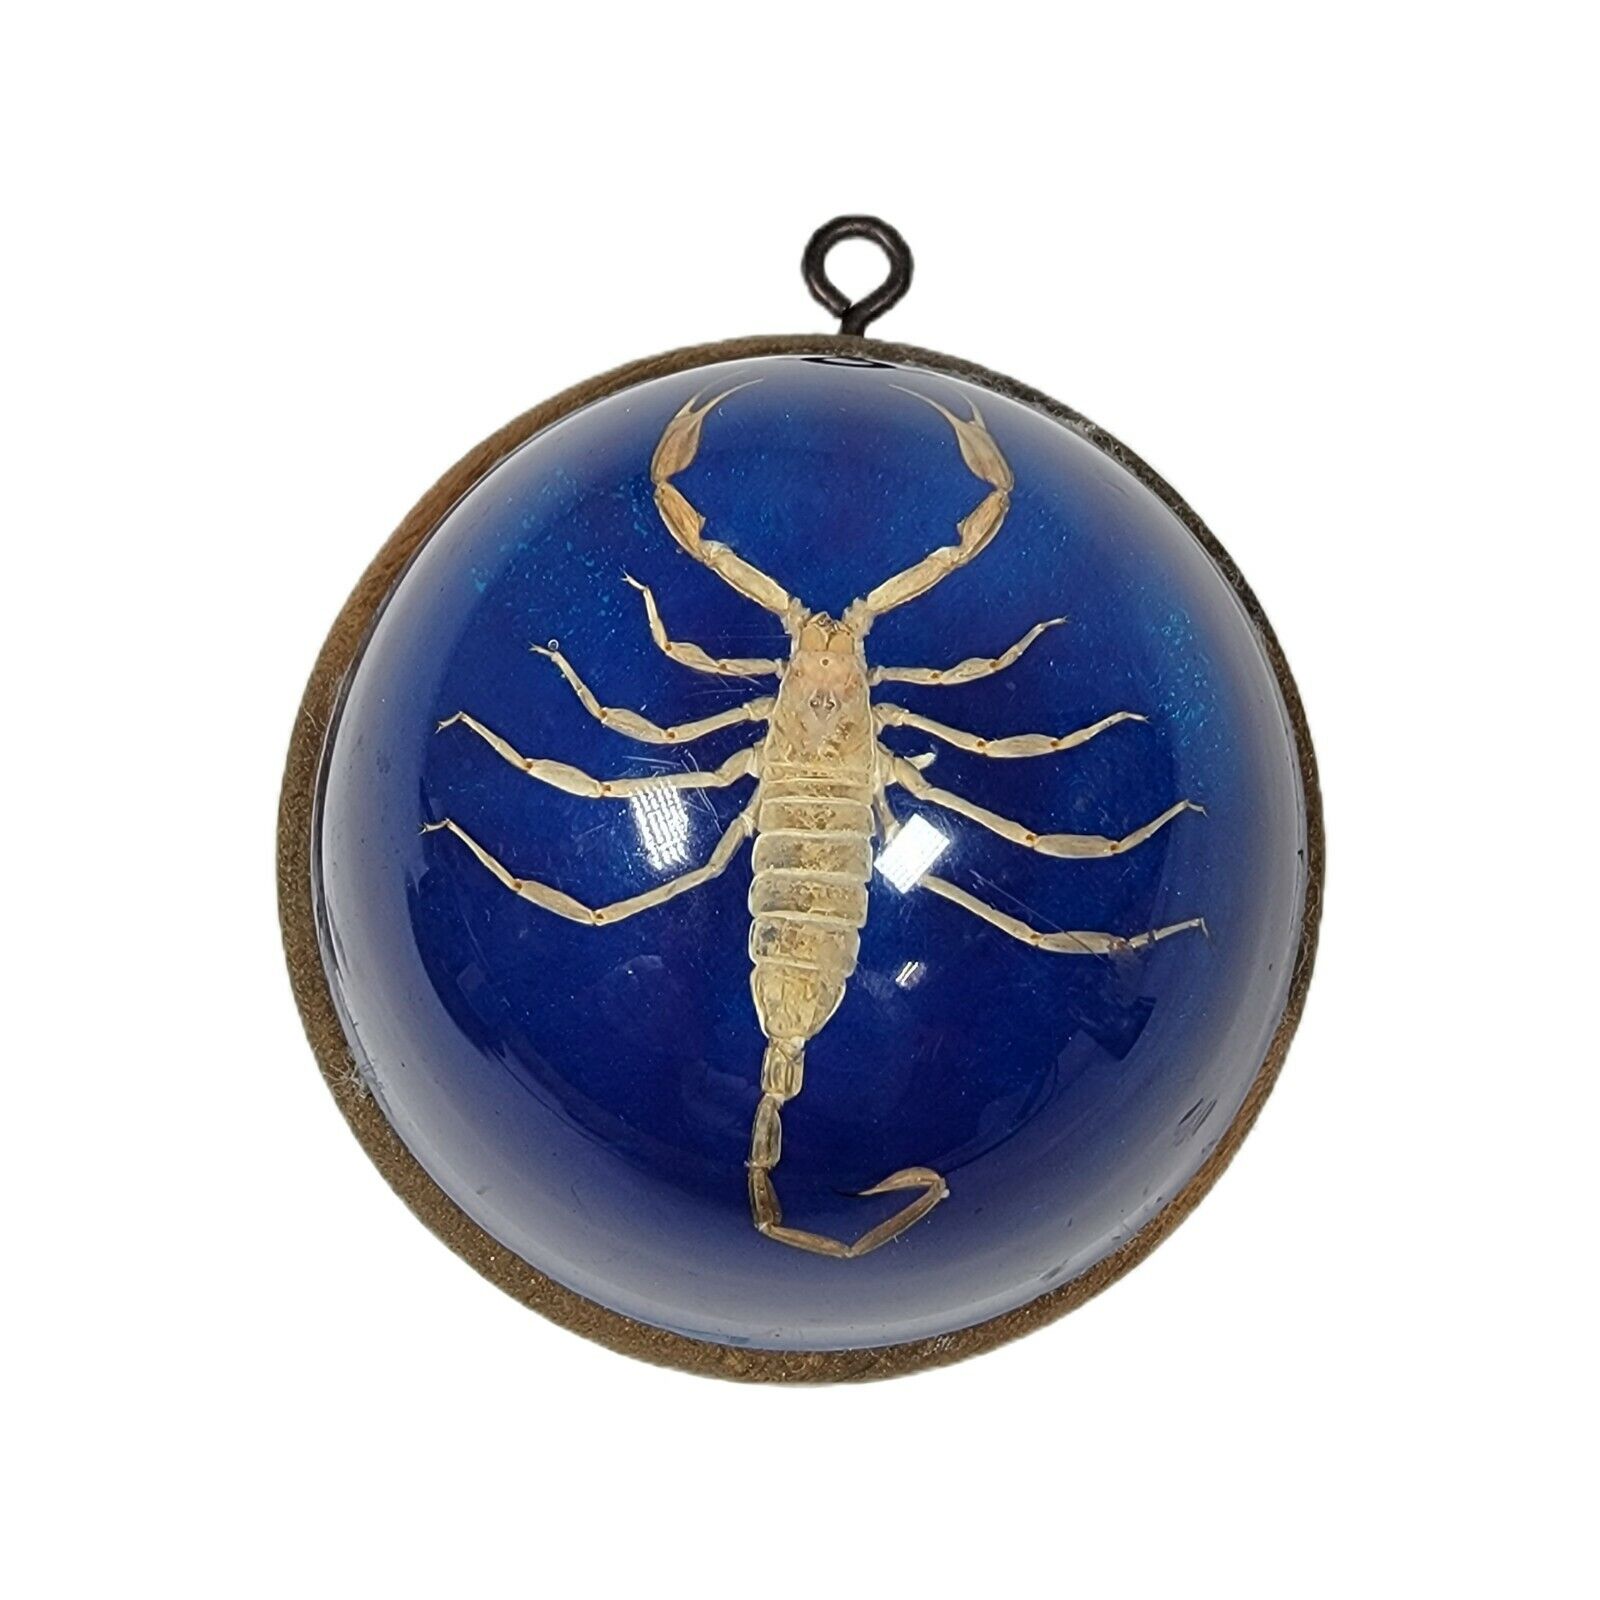 VINTAGE REAL SCORPION ROUND ACRYLIC LUCITE PAPERWEIGHT BLUE FELT BOTTOM HANGING 